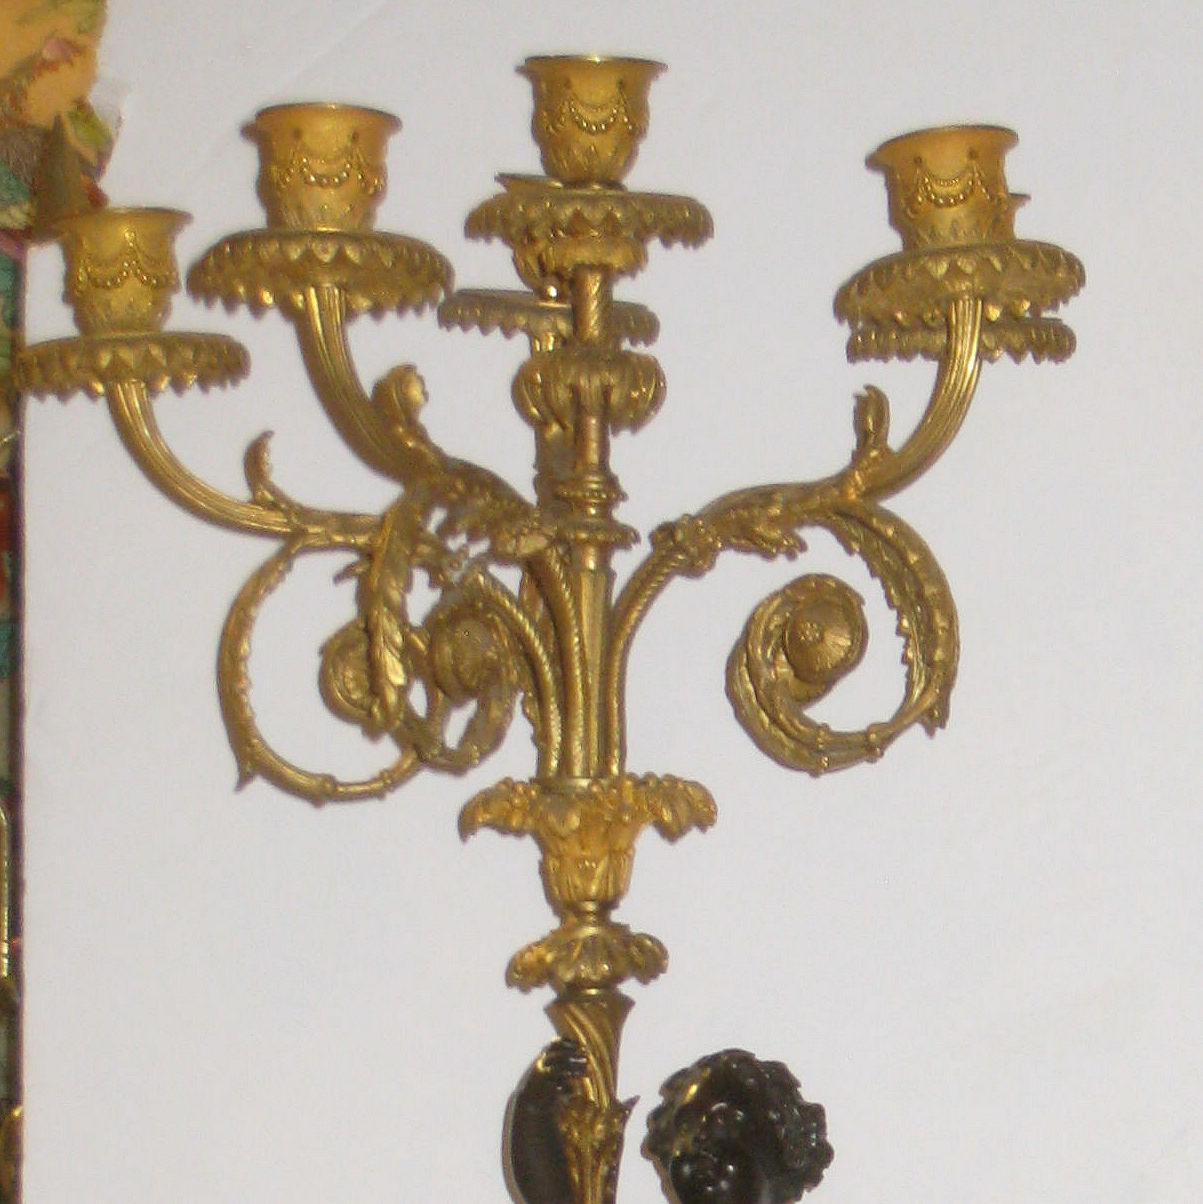 19th Century Pair of Gilt and Patinated Figural Bronze and Marble Candelabras